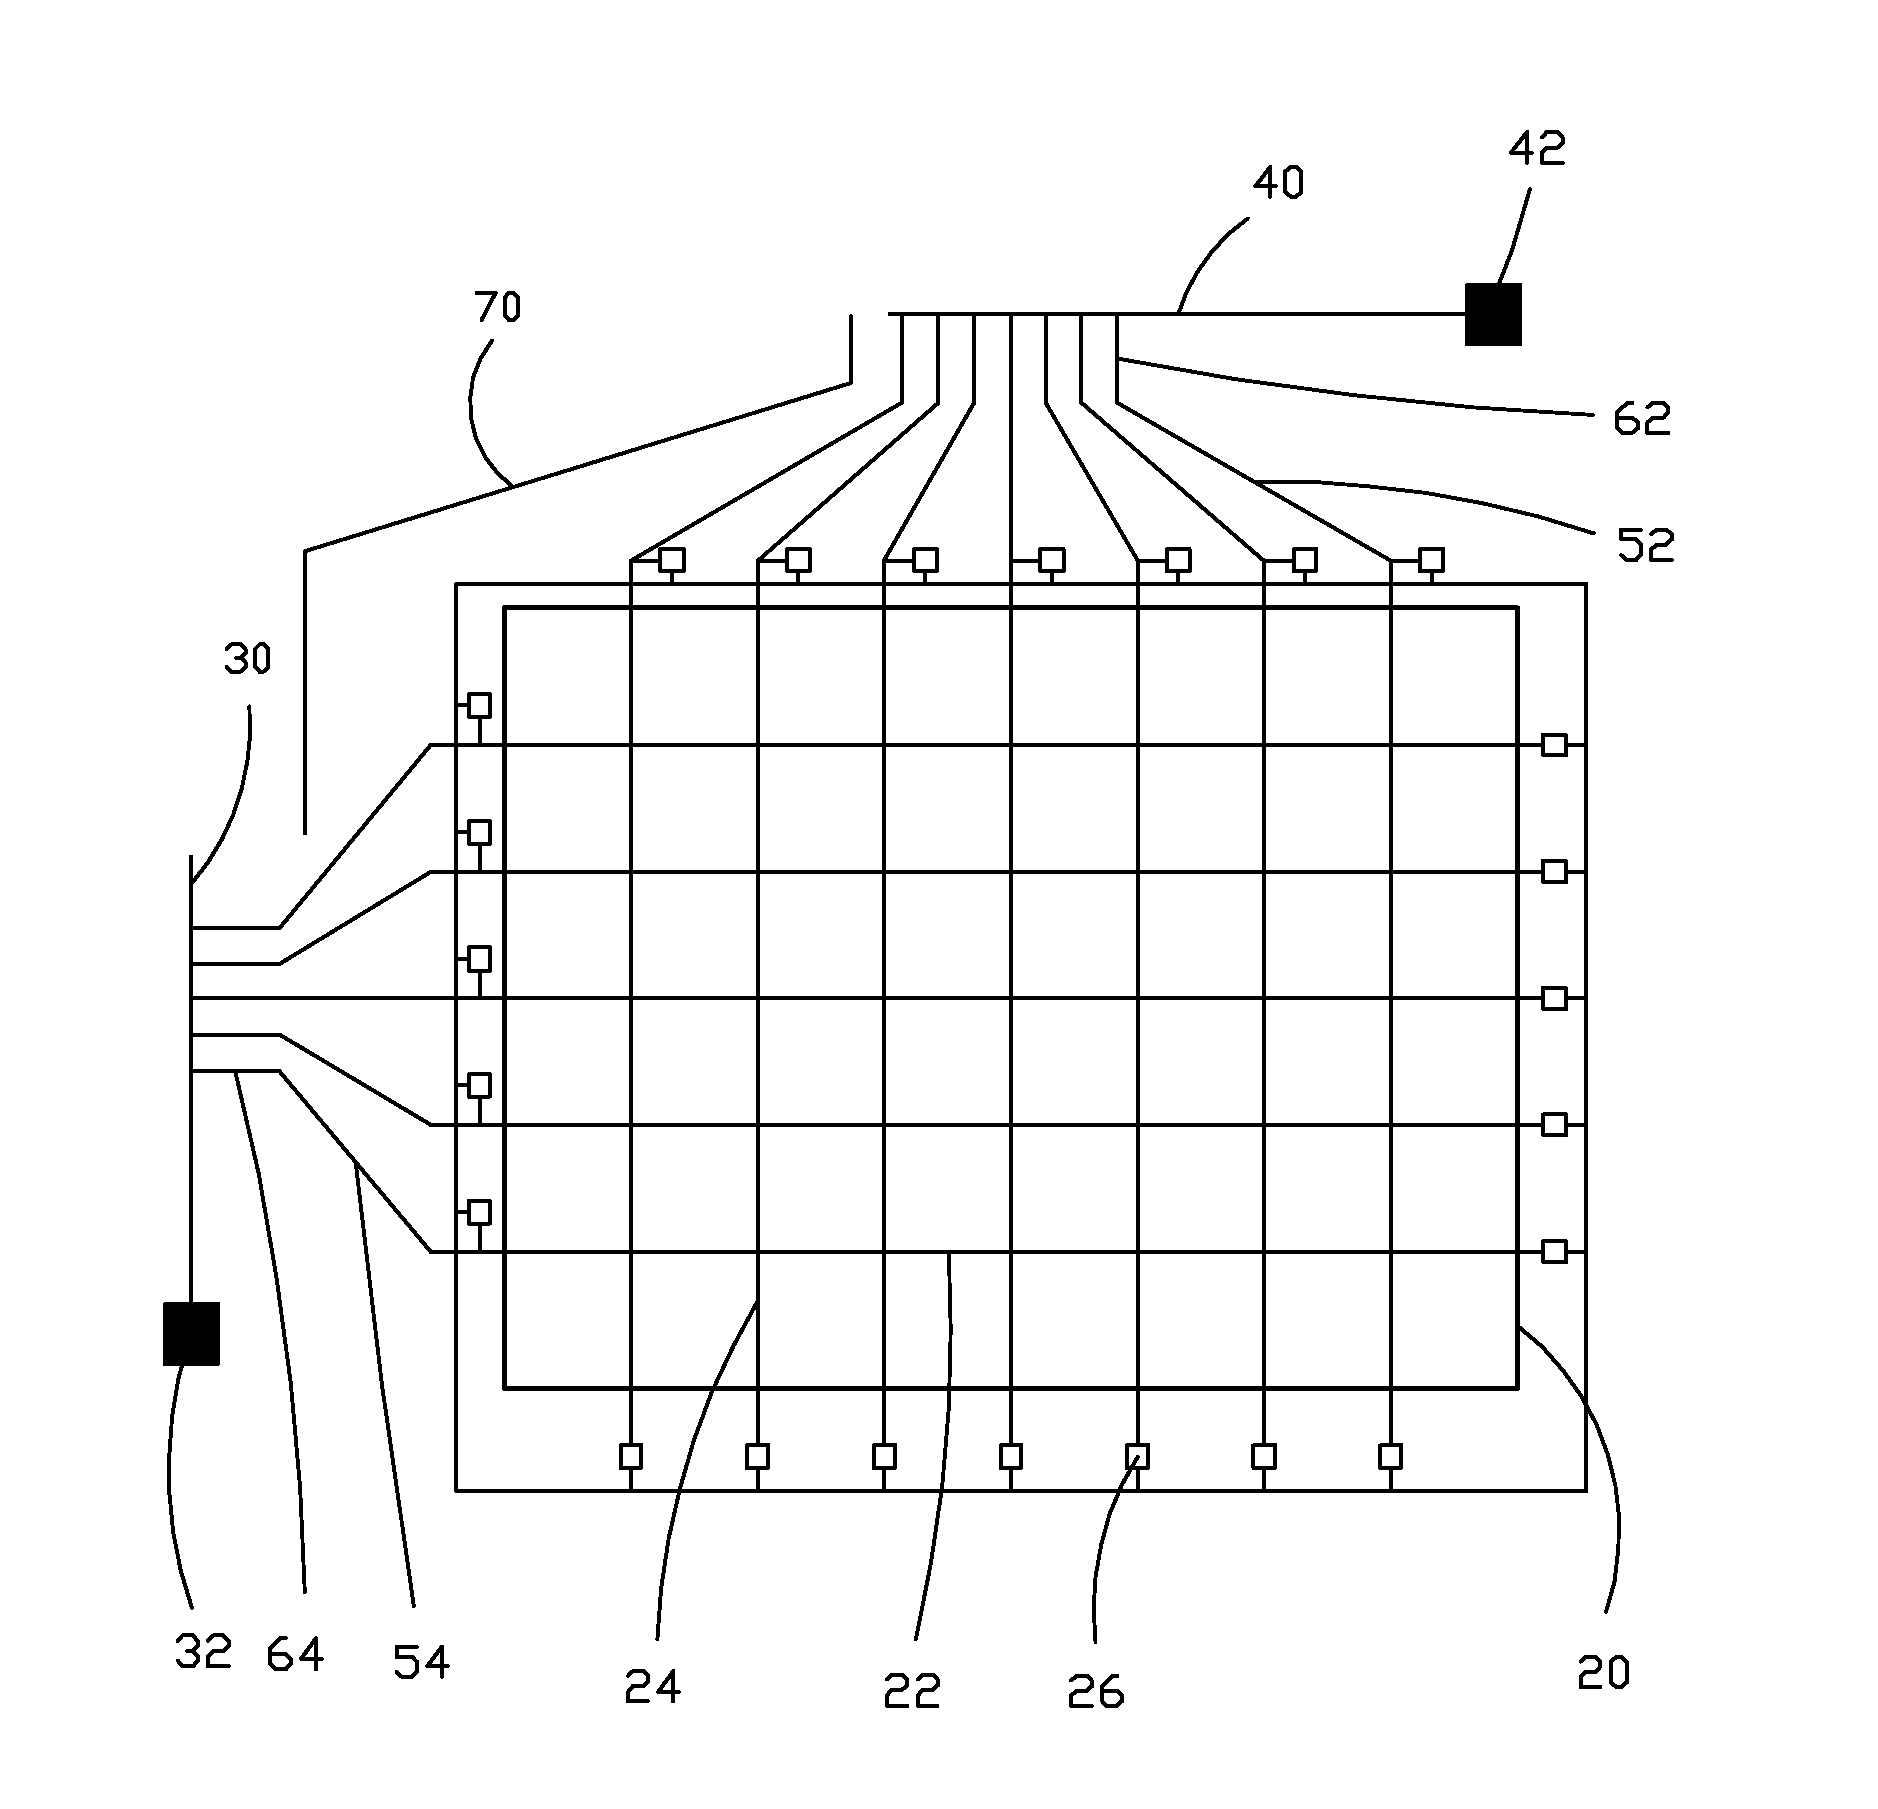 Anti-static structure of array substrate